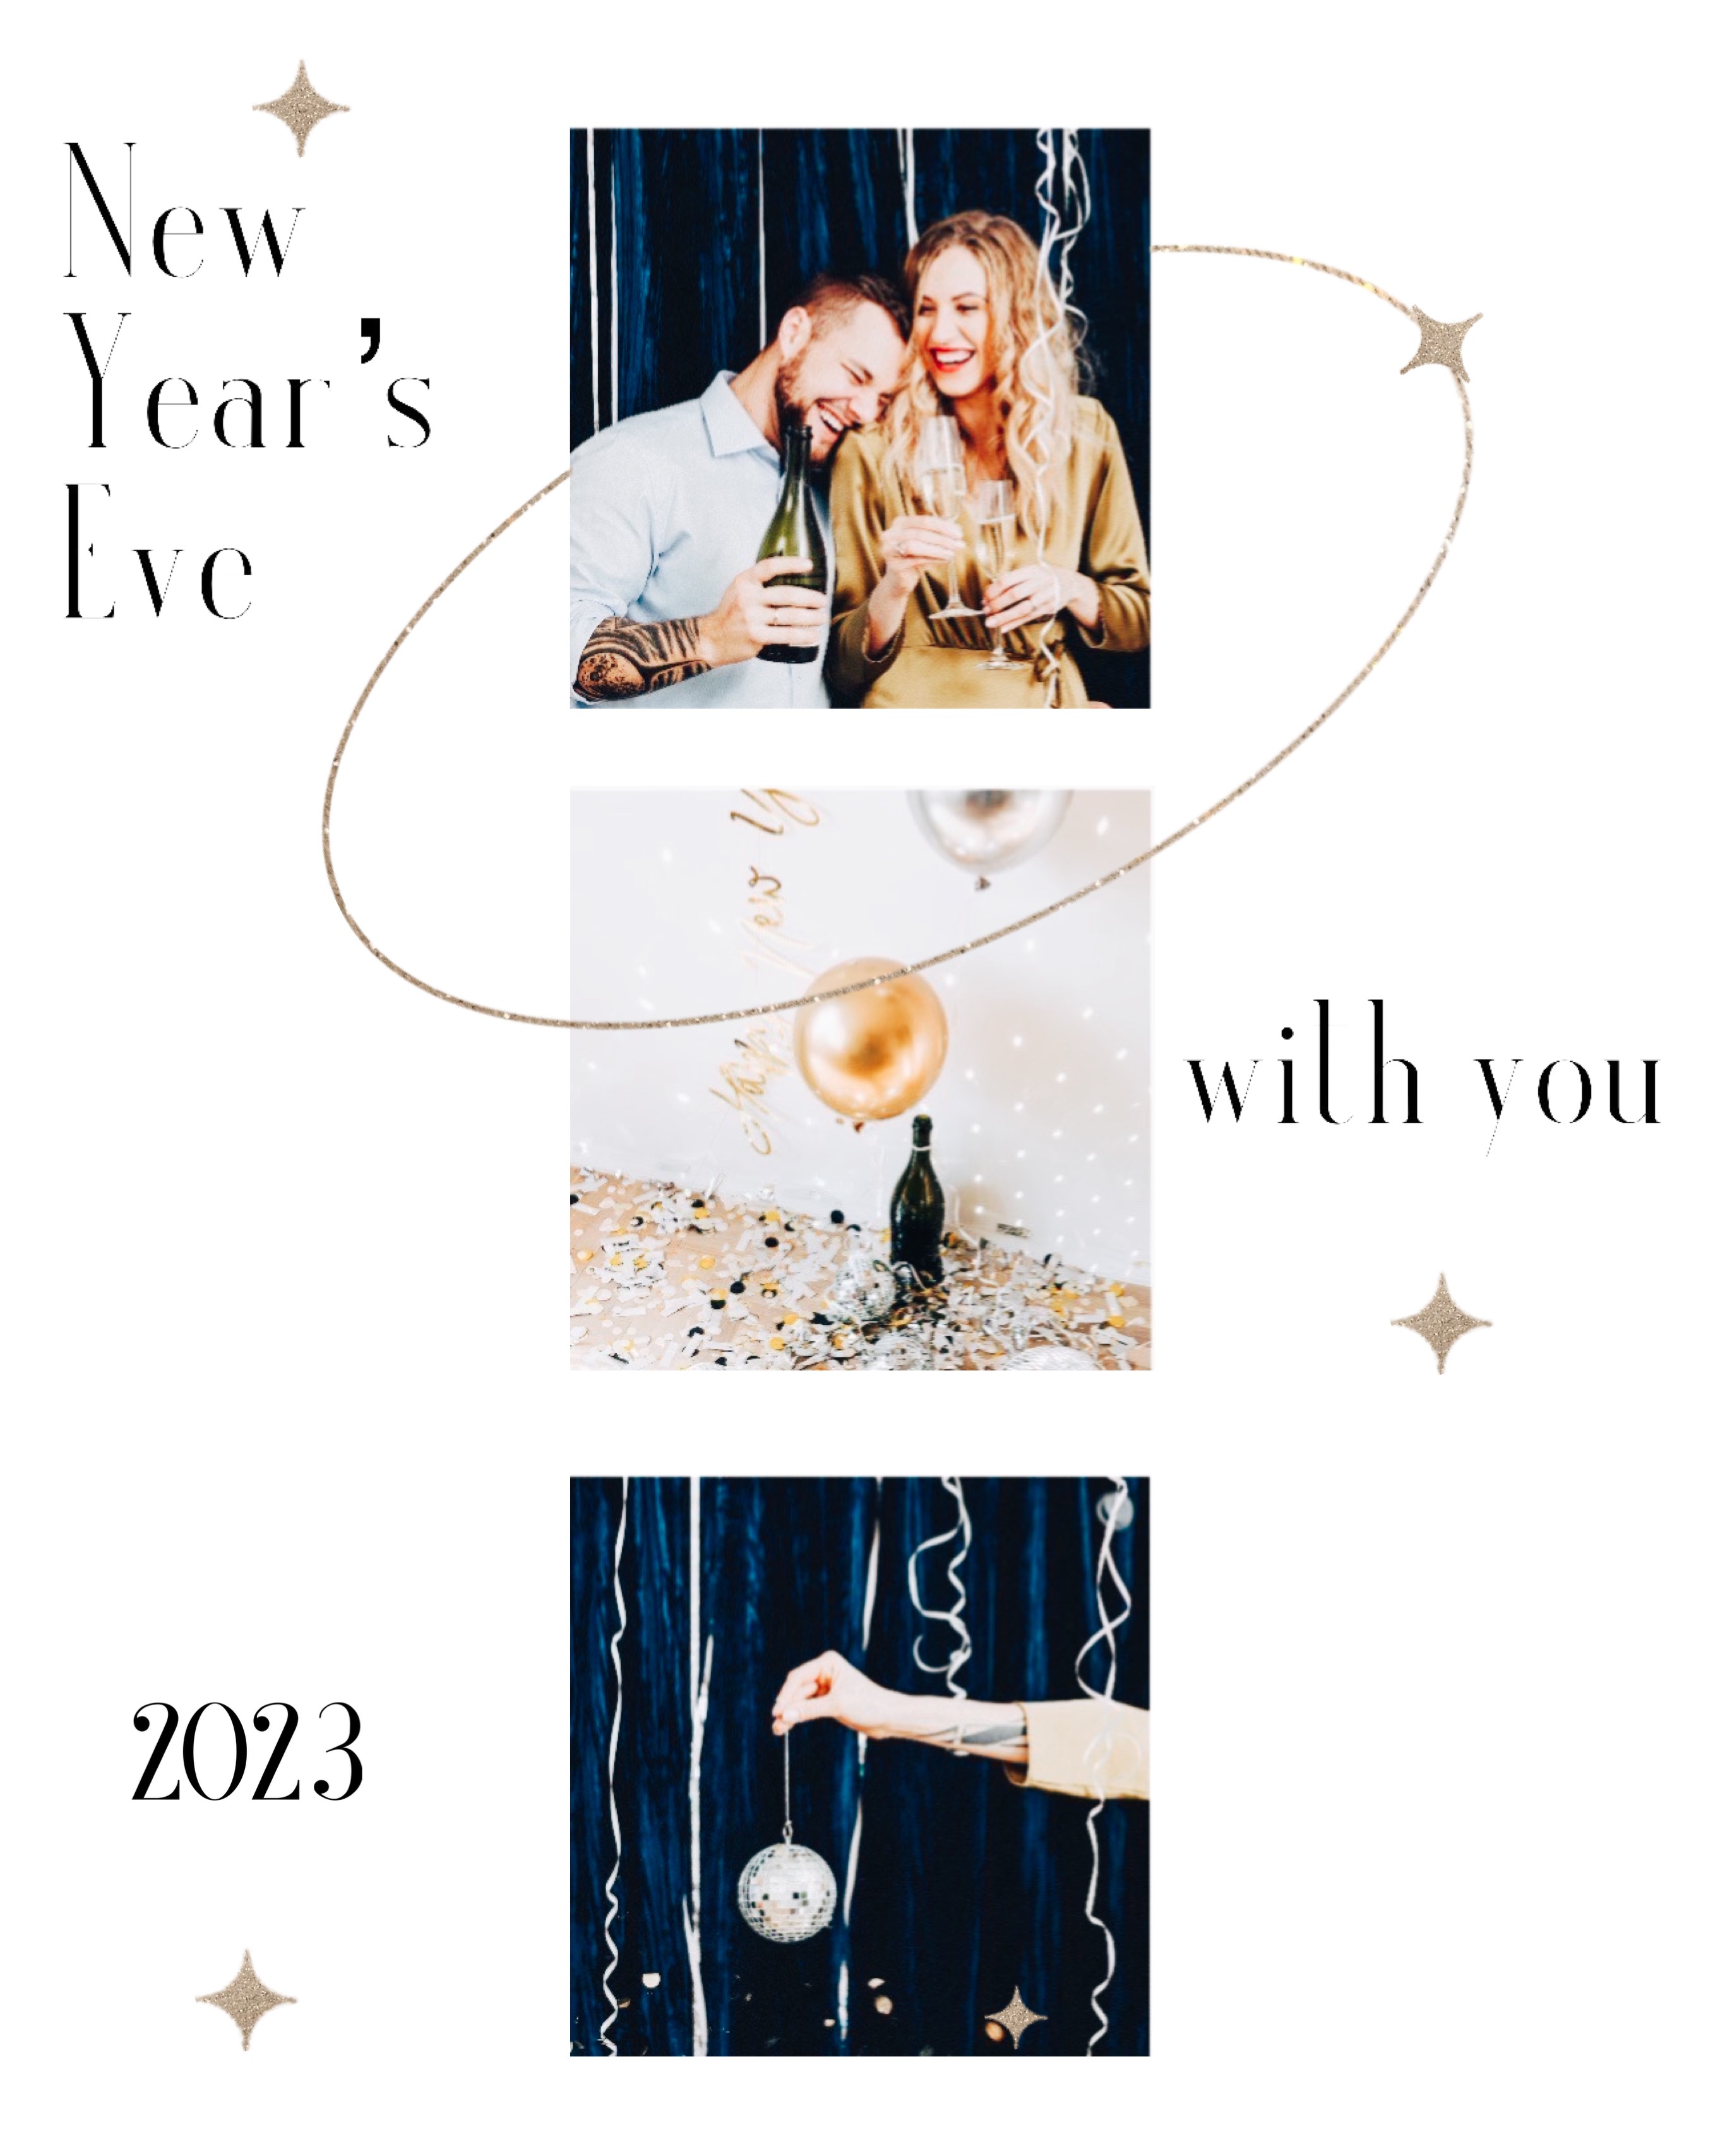 A New Year'S Eve Photo Collage With Balloons And Confetti Happy New Year Template